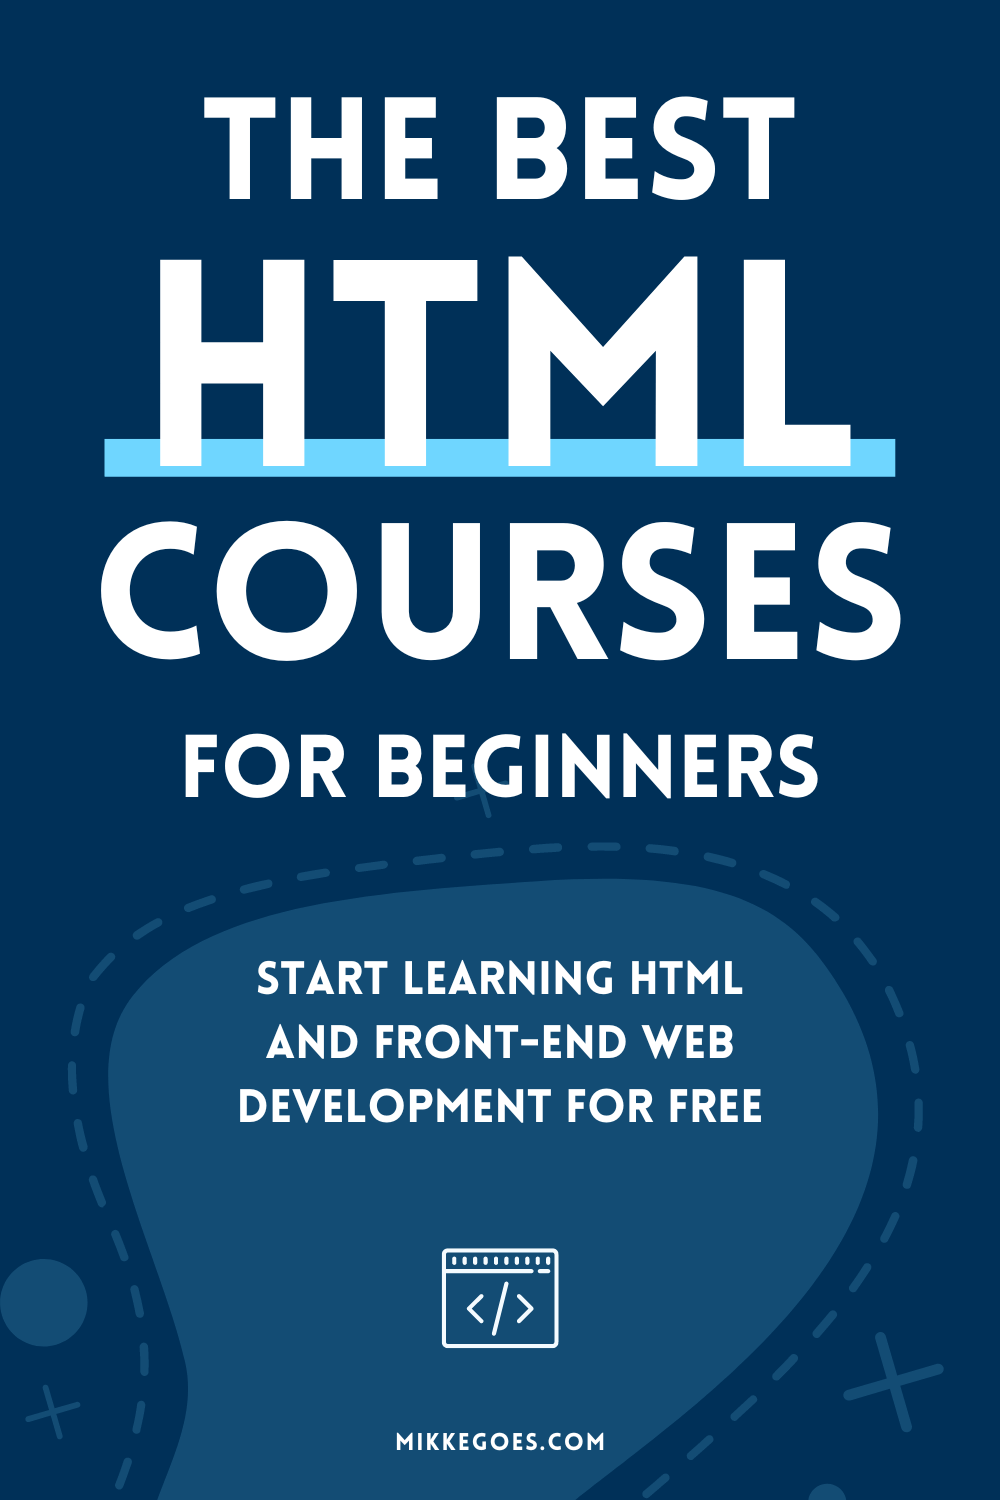 The best HTML courses for beginners - Start learning HTML and front-end web development for free